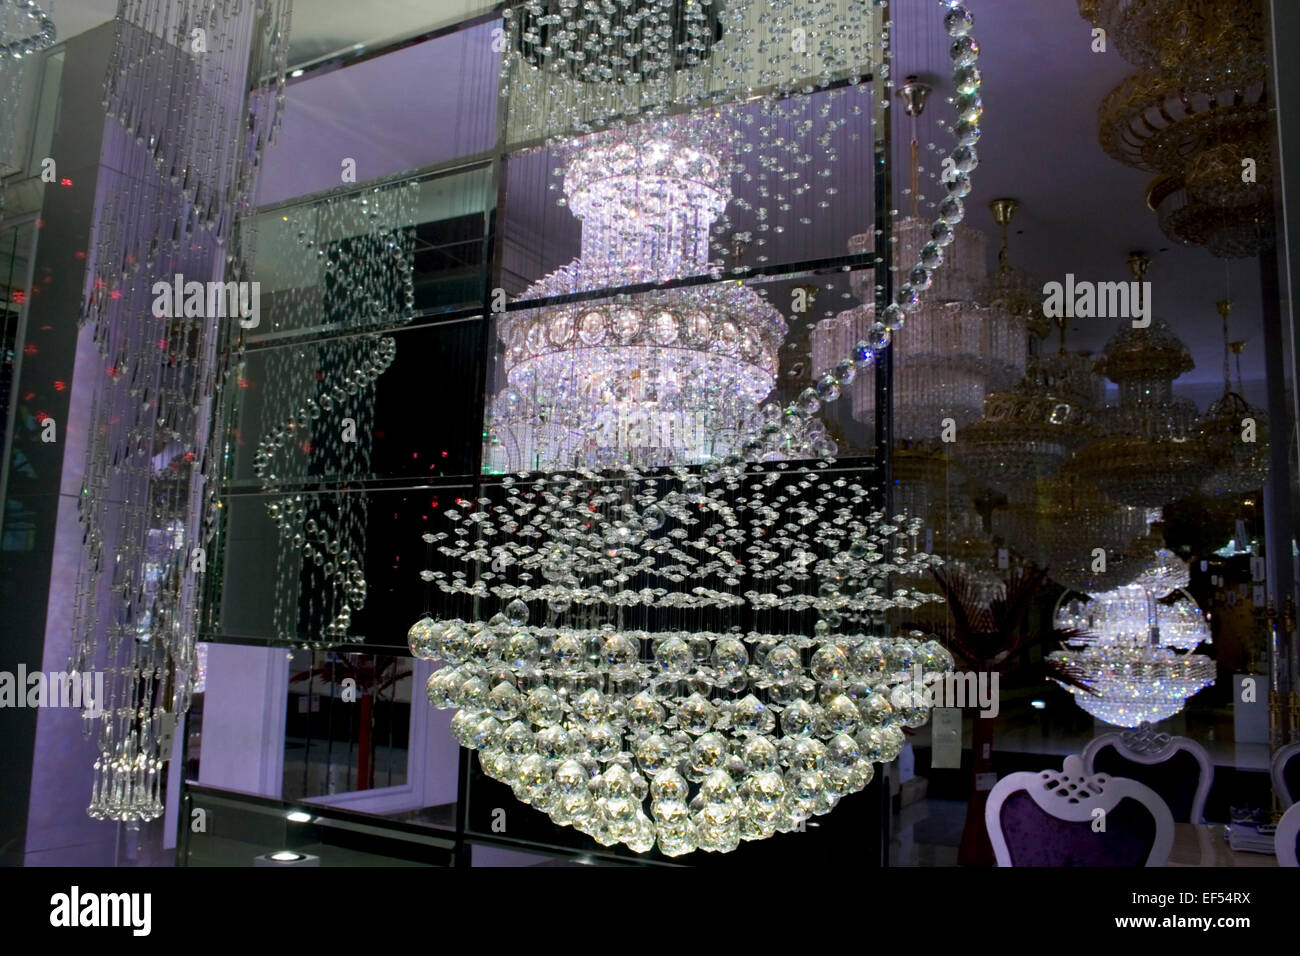 A chandelier is seen on display through a glass window at a light store in Phnom Penh, Cambodia. Stock Photo